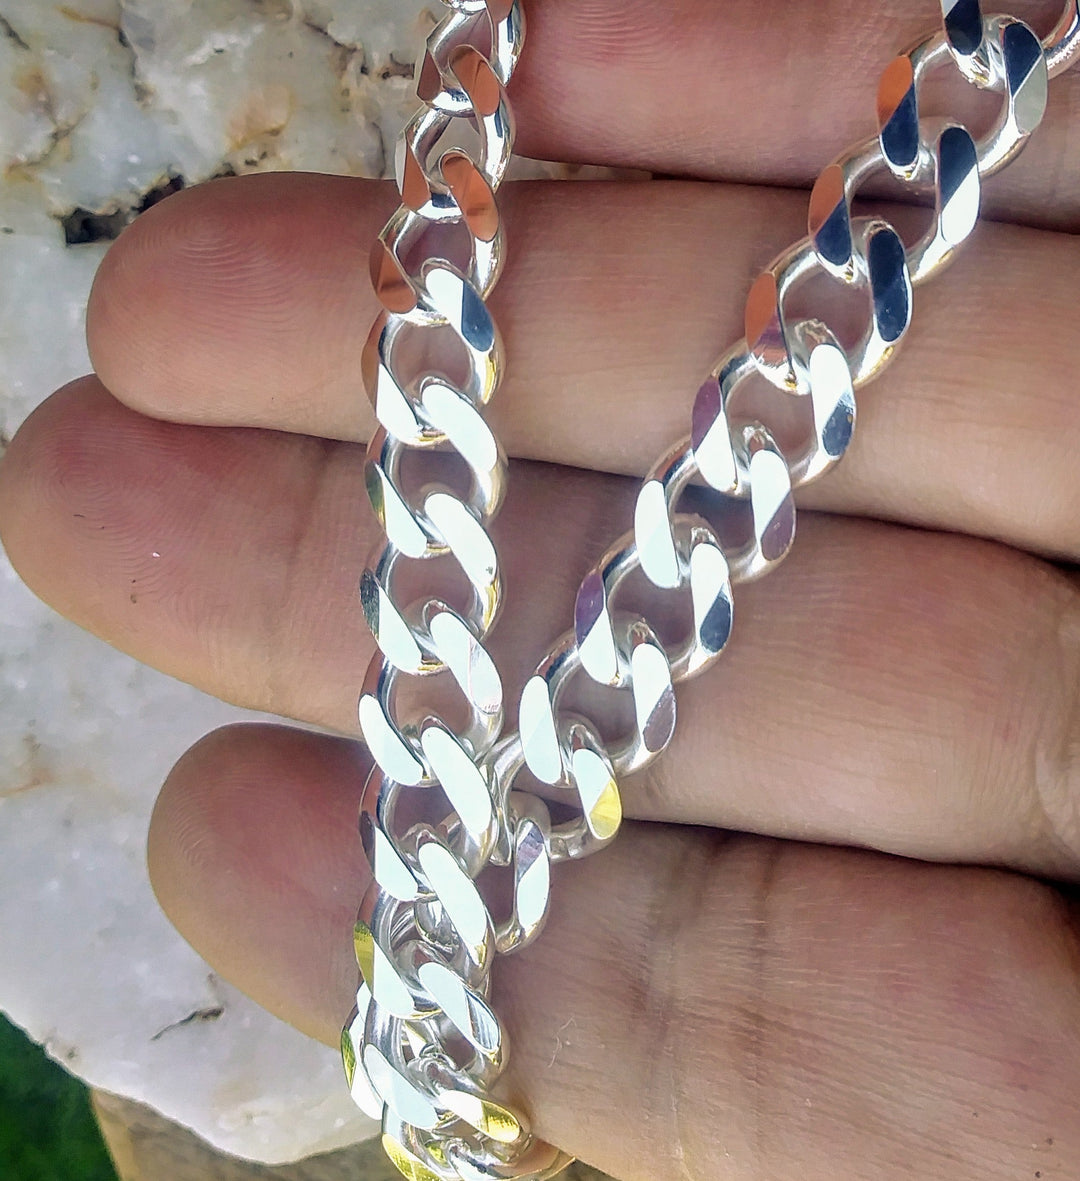 Men's Heavy Silver Curb Chain Necklace or Bracelet 9mm Oxidized or Polished Chain